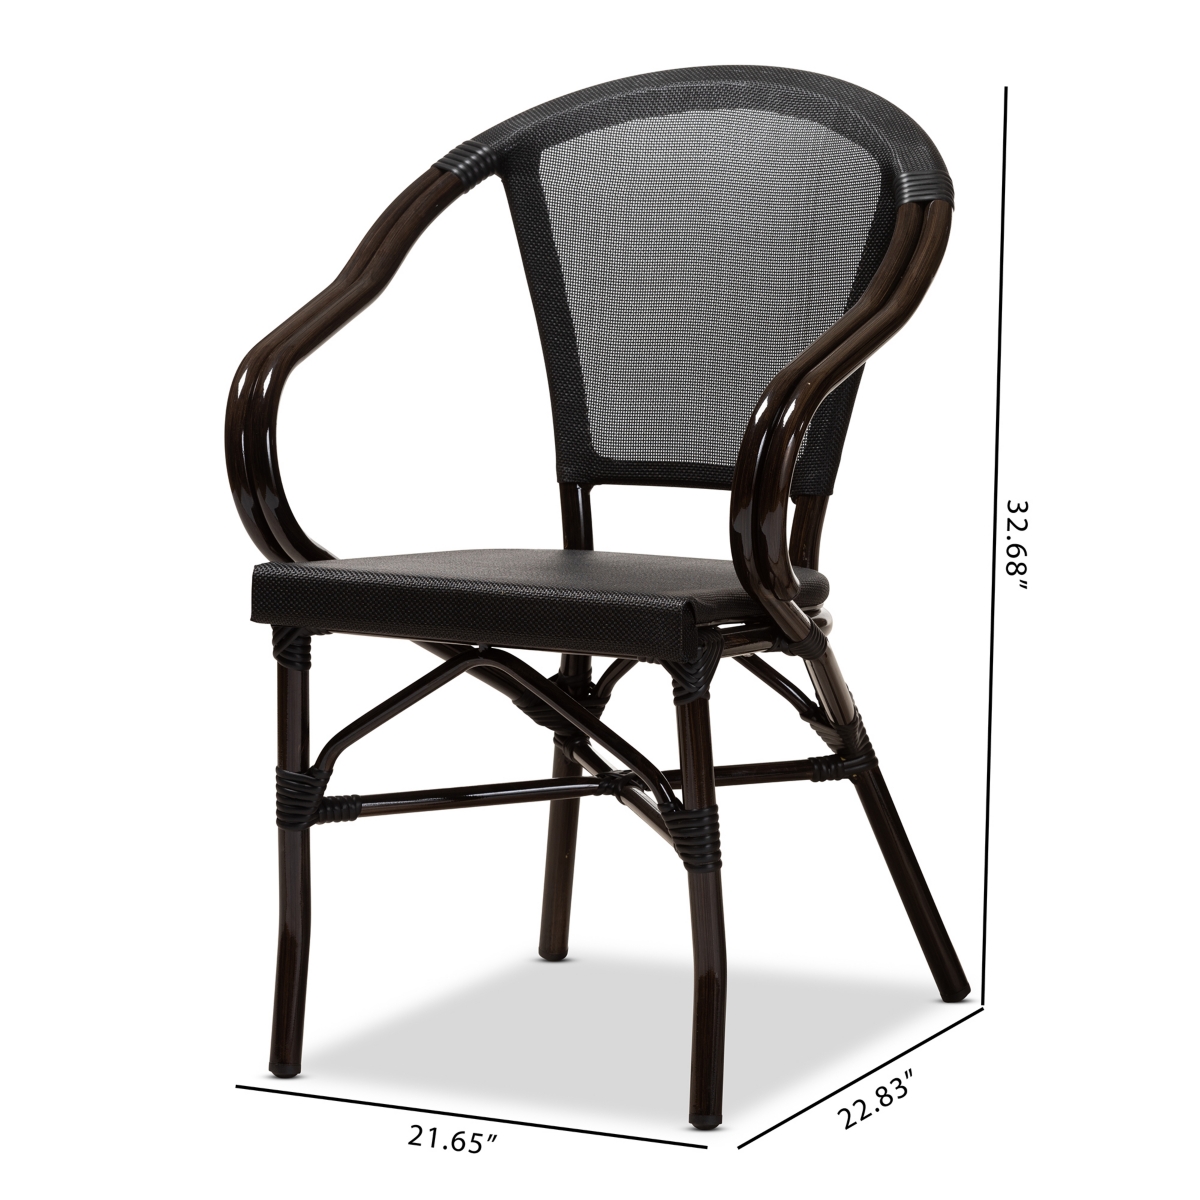 Artus Outdoor Dining Chair